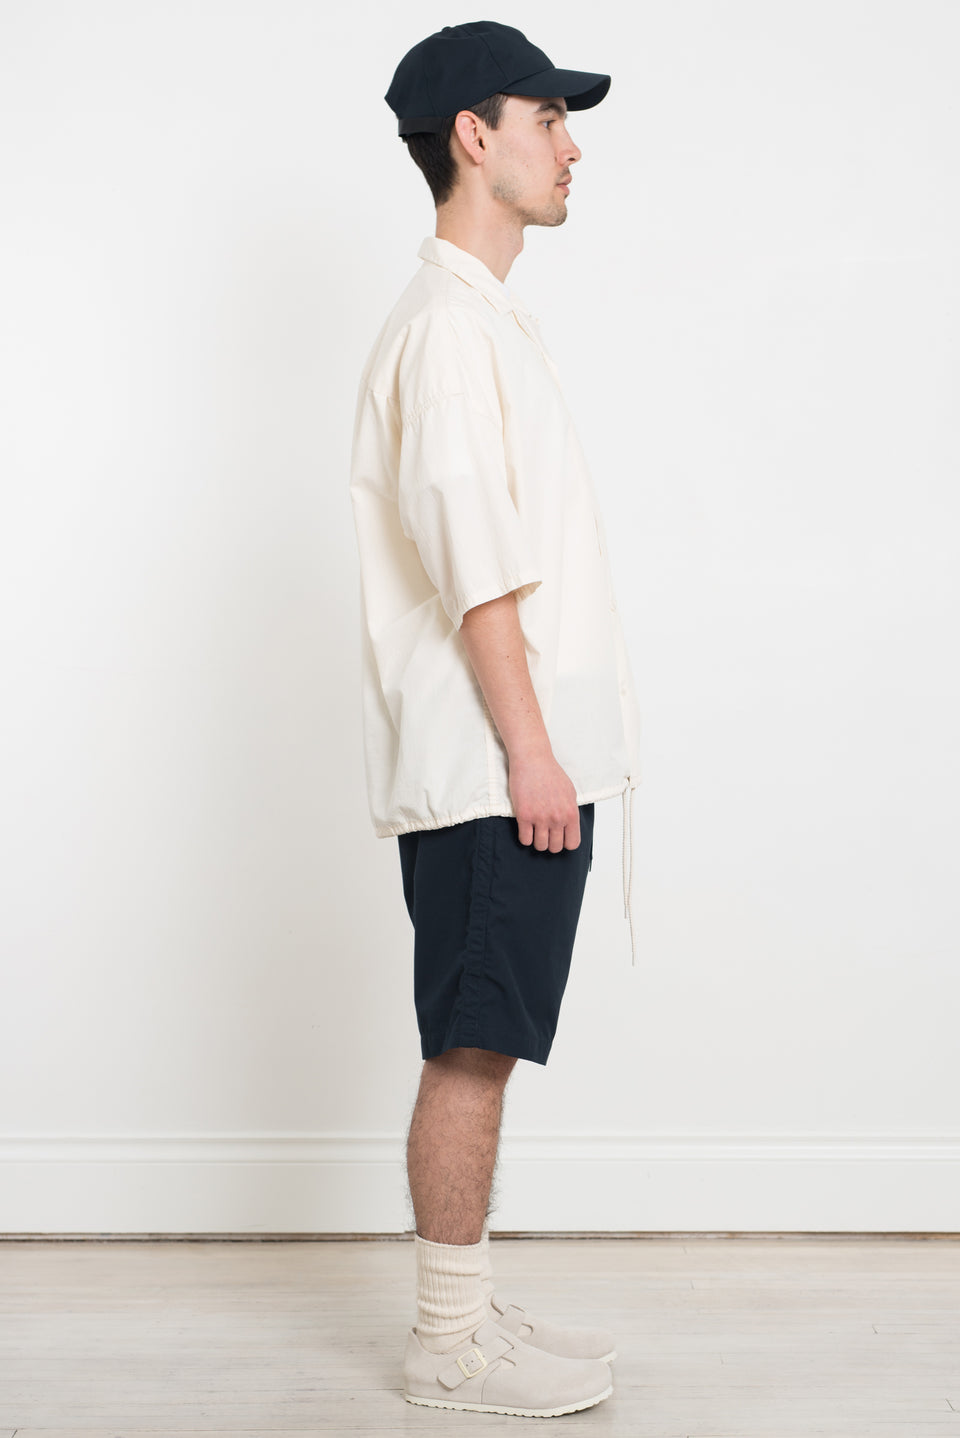 ours着用　cornerstone short pullovers